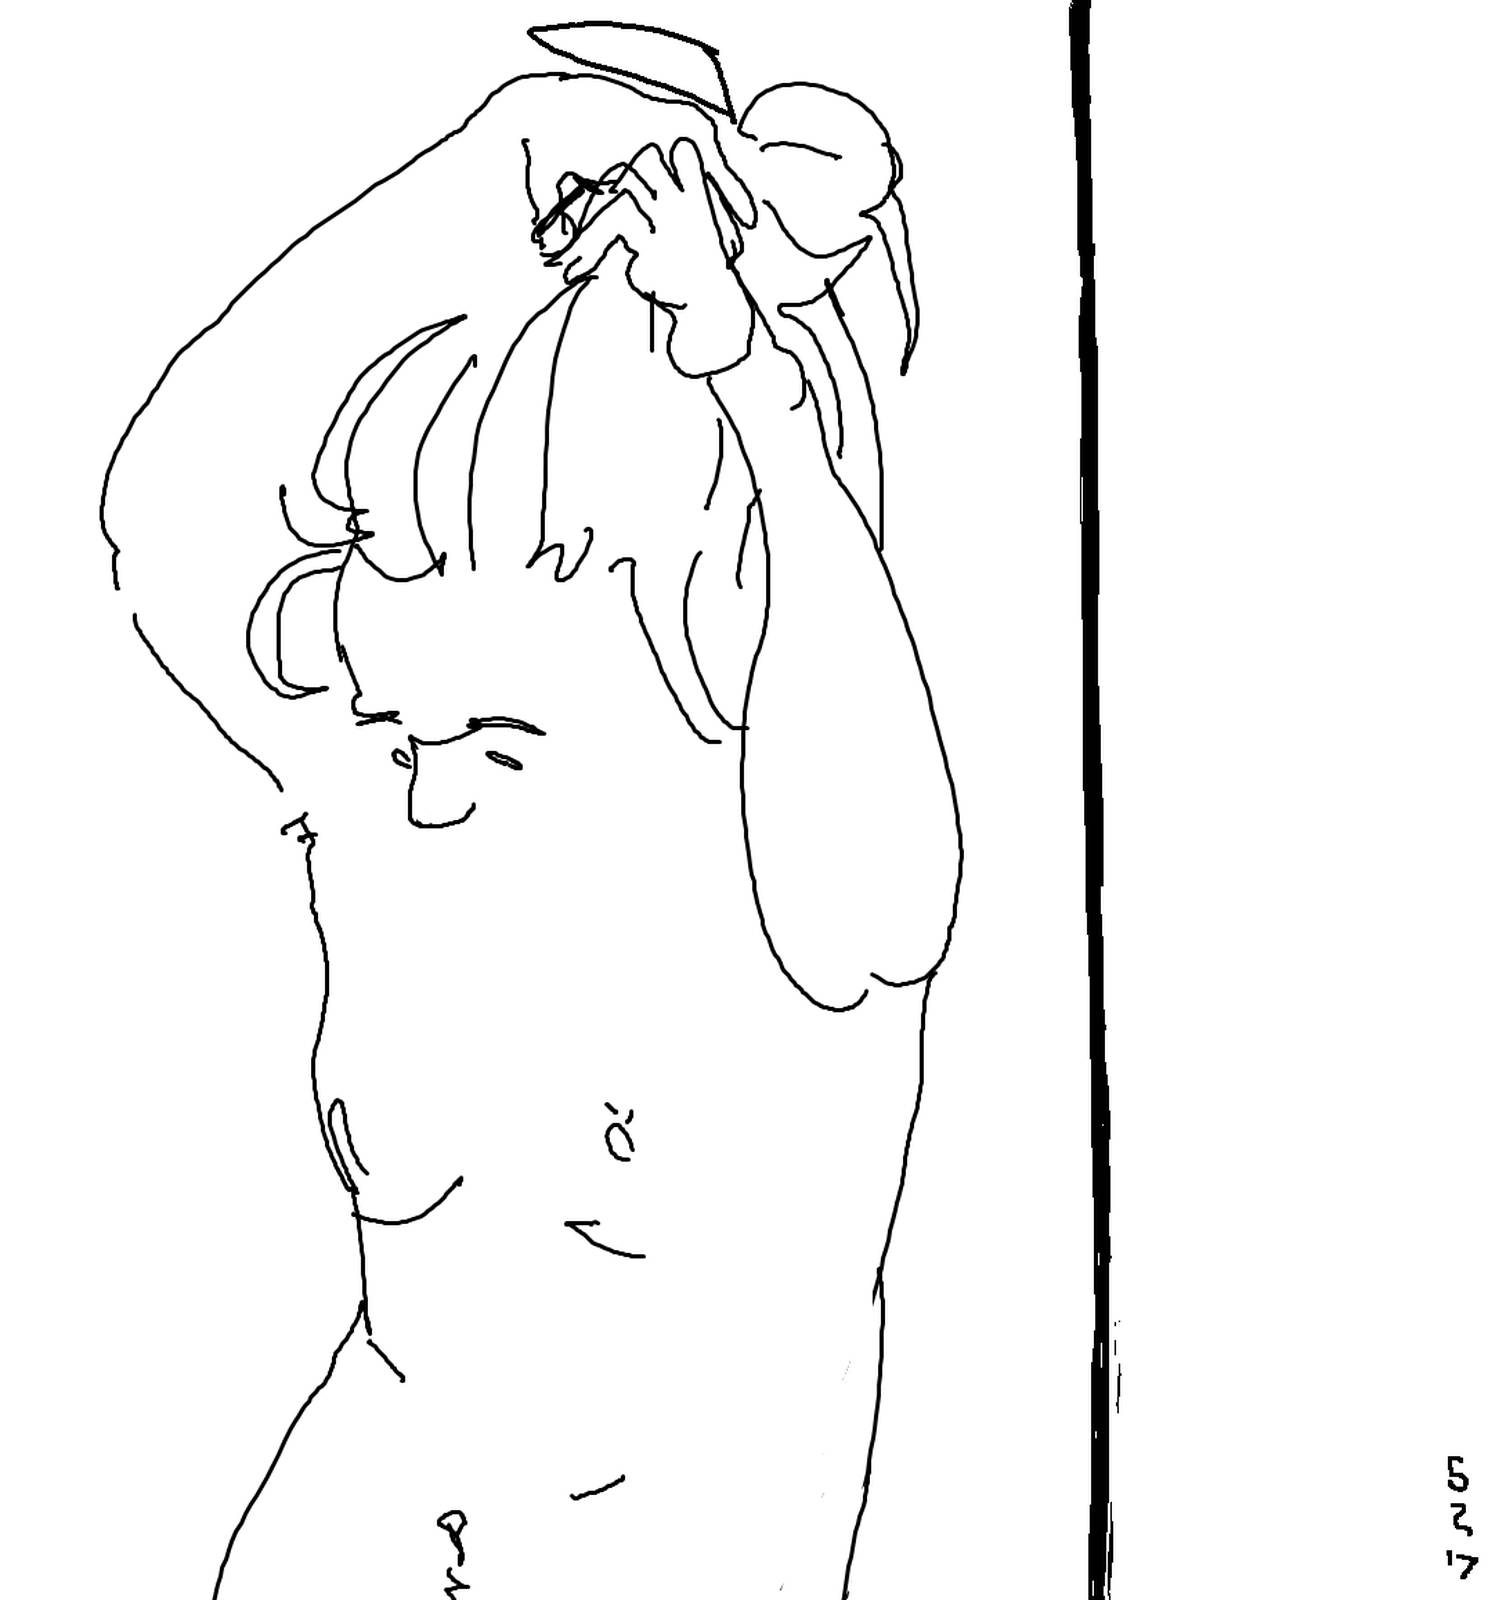 MSpaint sketch of someone tying their hair up, shirtless